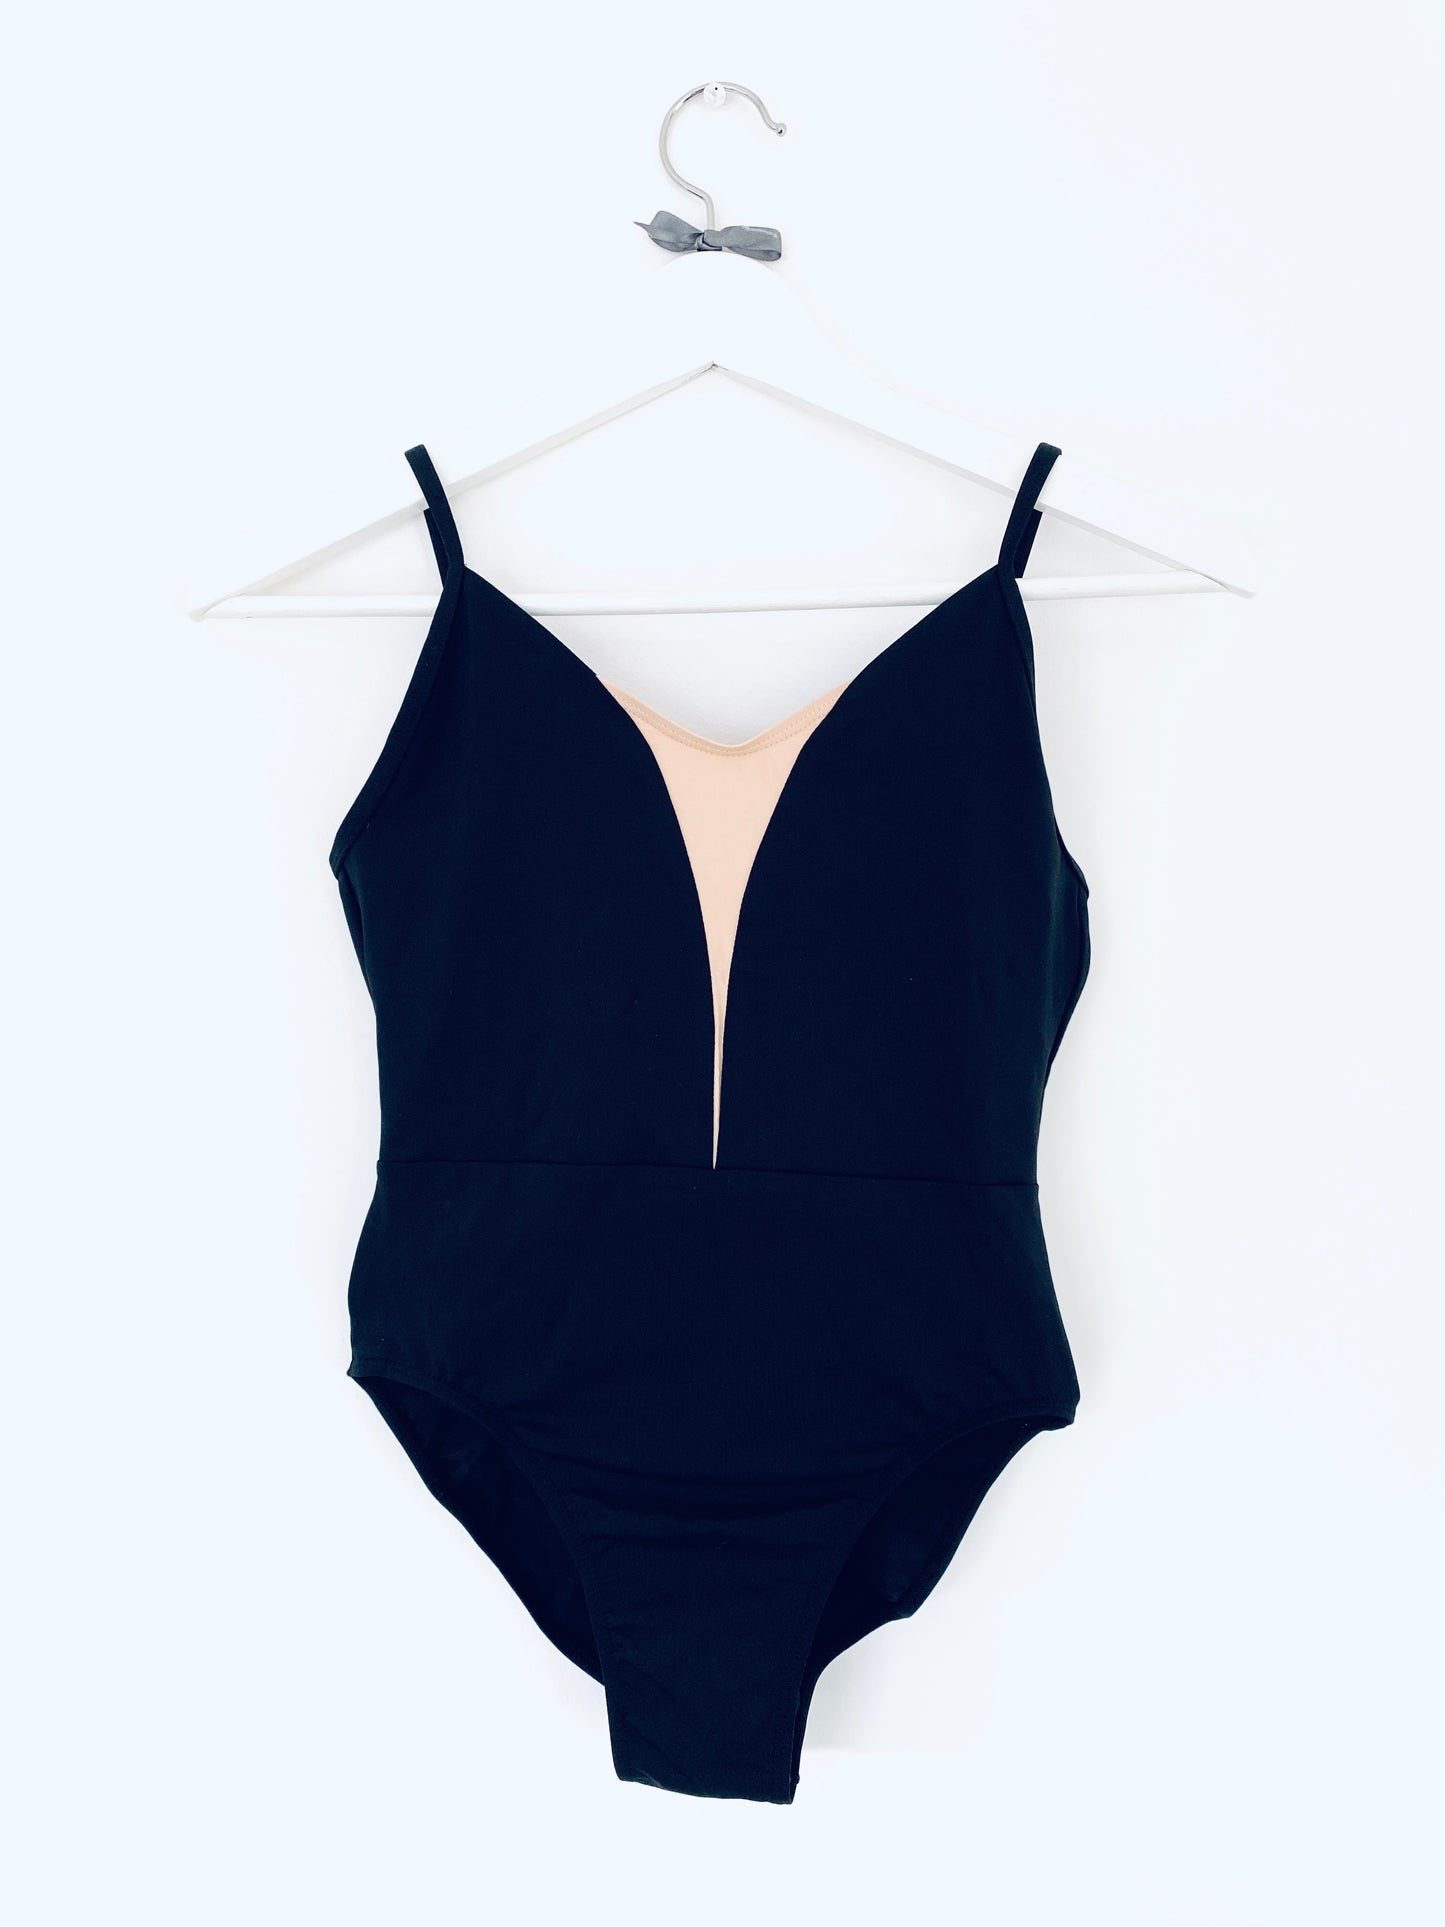 Black camisole ballet leotard with deep back from The Collective Dancewear